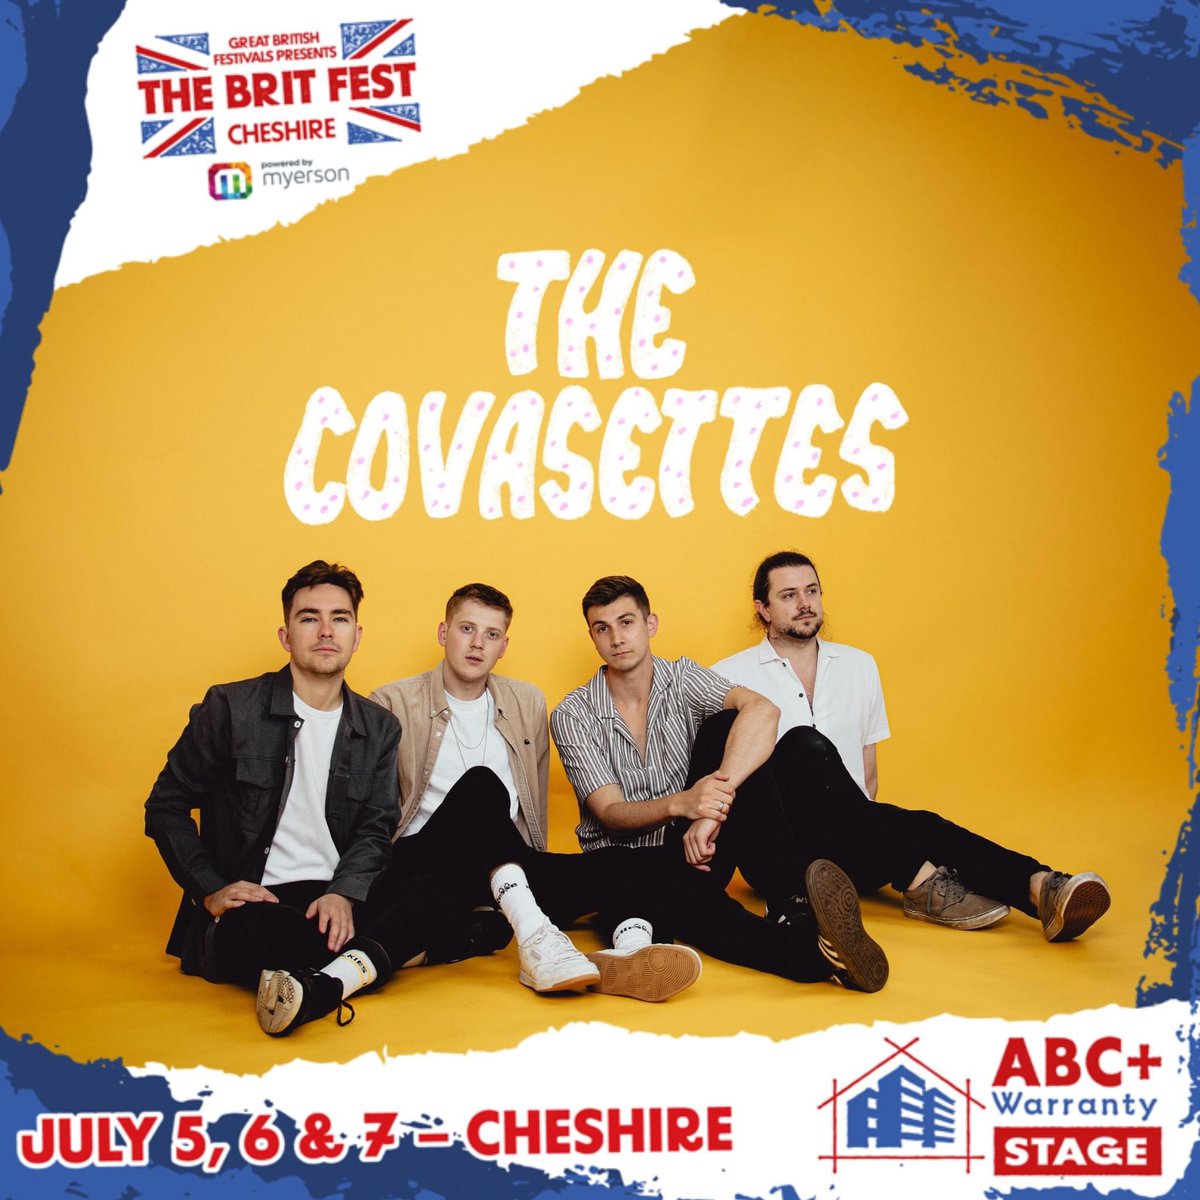 🎸 Get ready for an electrifying set of Indie Rock with @TheCovasettes ! 🎶🔥 Formed in the heart of Manchester’s student town, Fallowfield, this quartet is set to light up the @abcwarranty stage on Sunday July 7th!

🎟️ Tickets available NOW at thebritfest.co.uk! 🌟